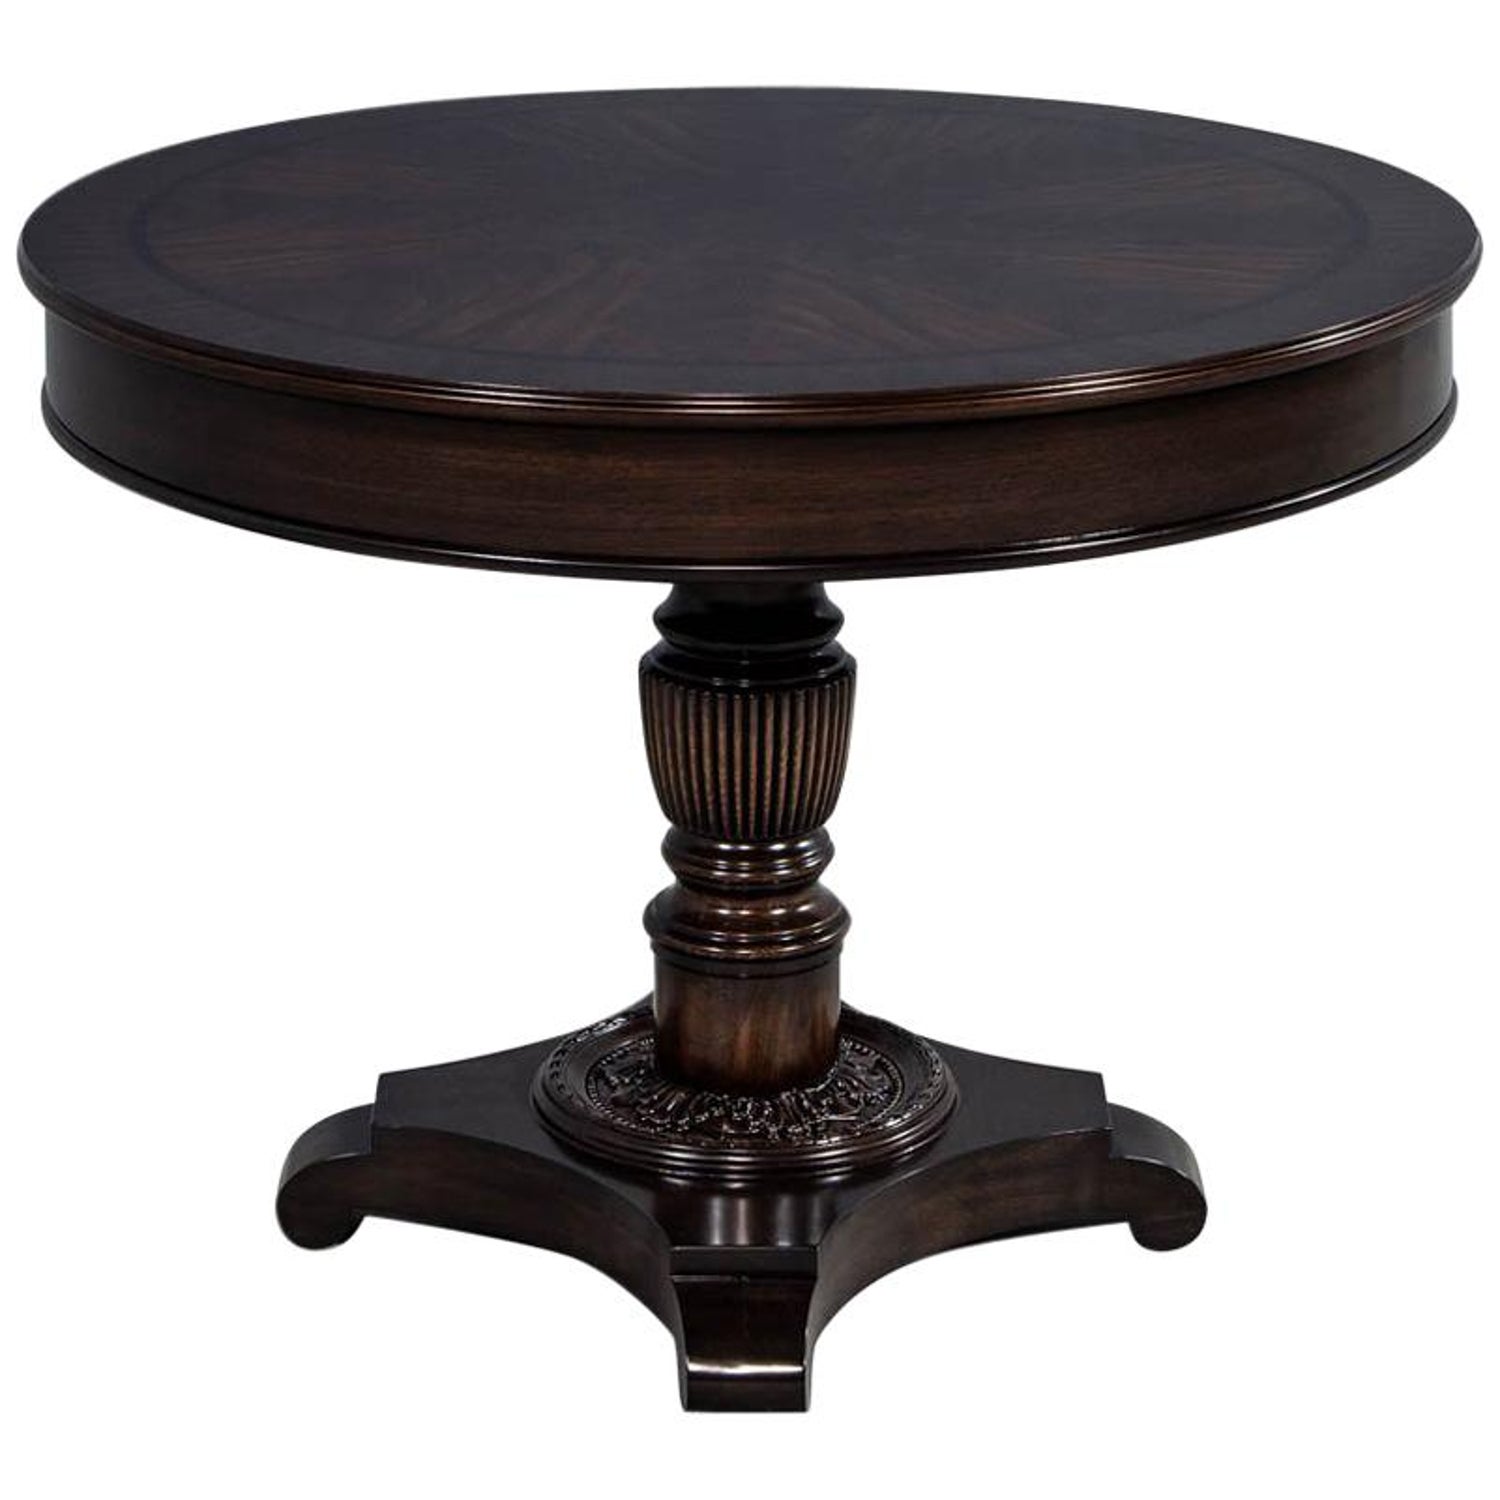 Focal Center Hall Foyer Table At 1stdibs, Round Center Hall Table